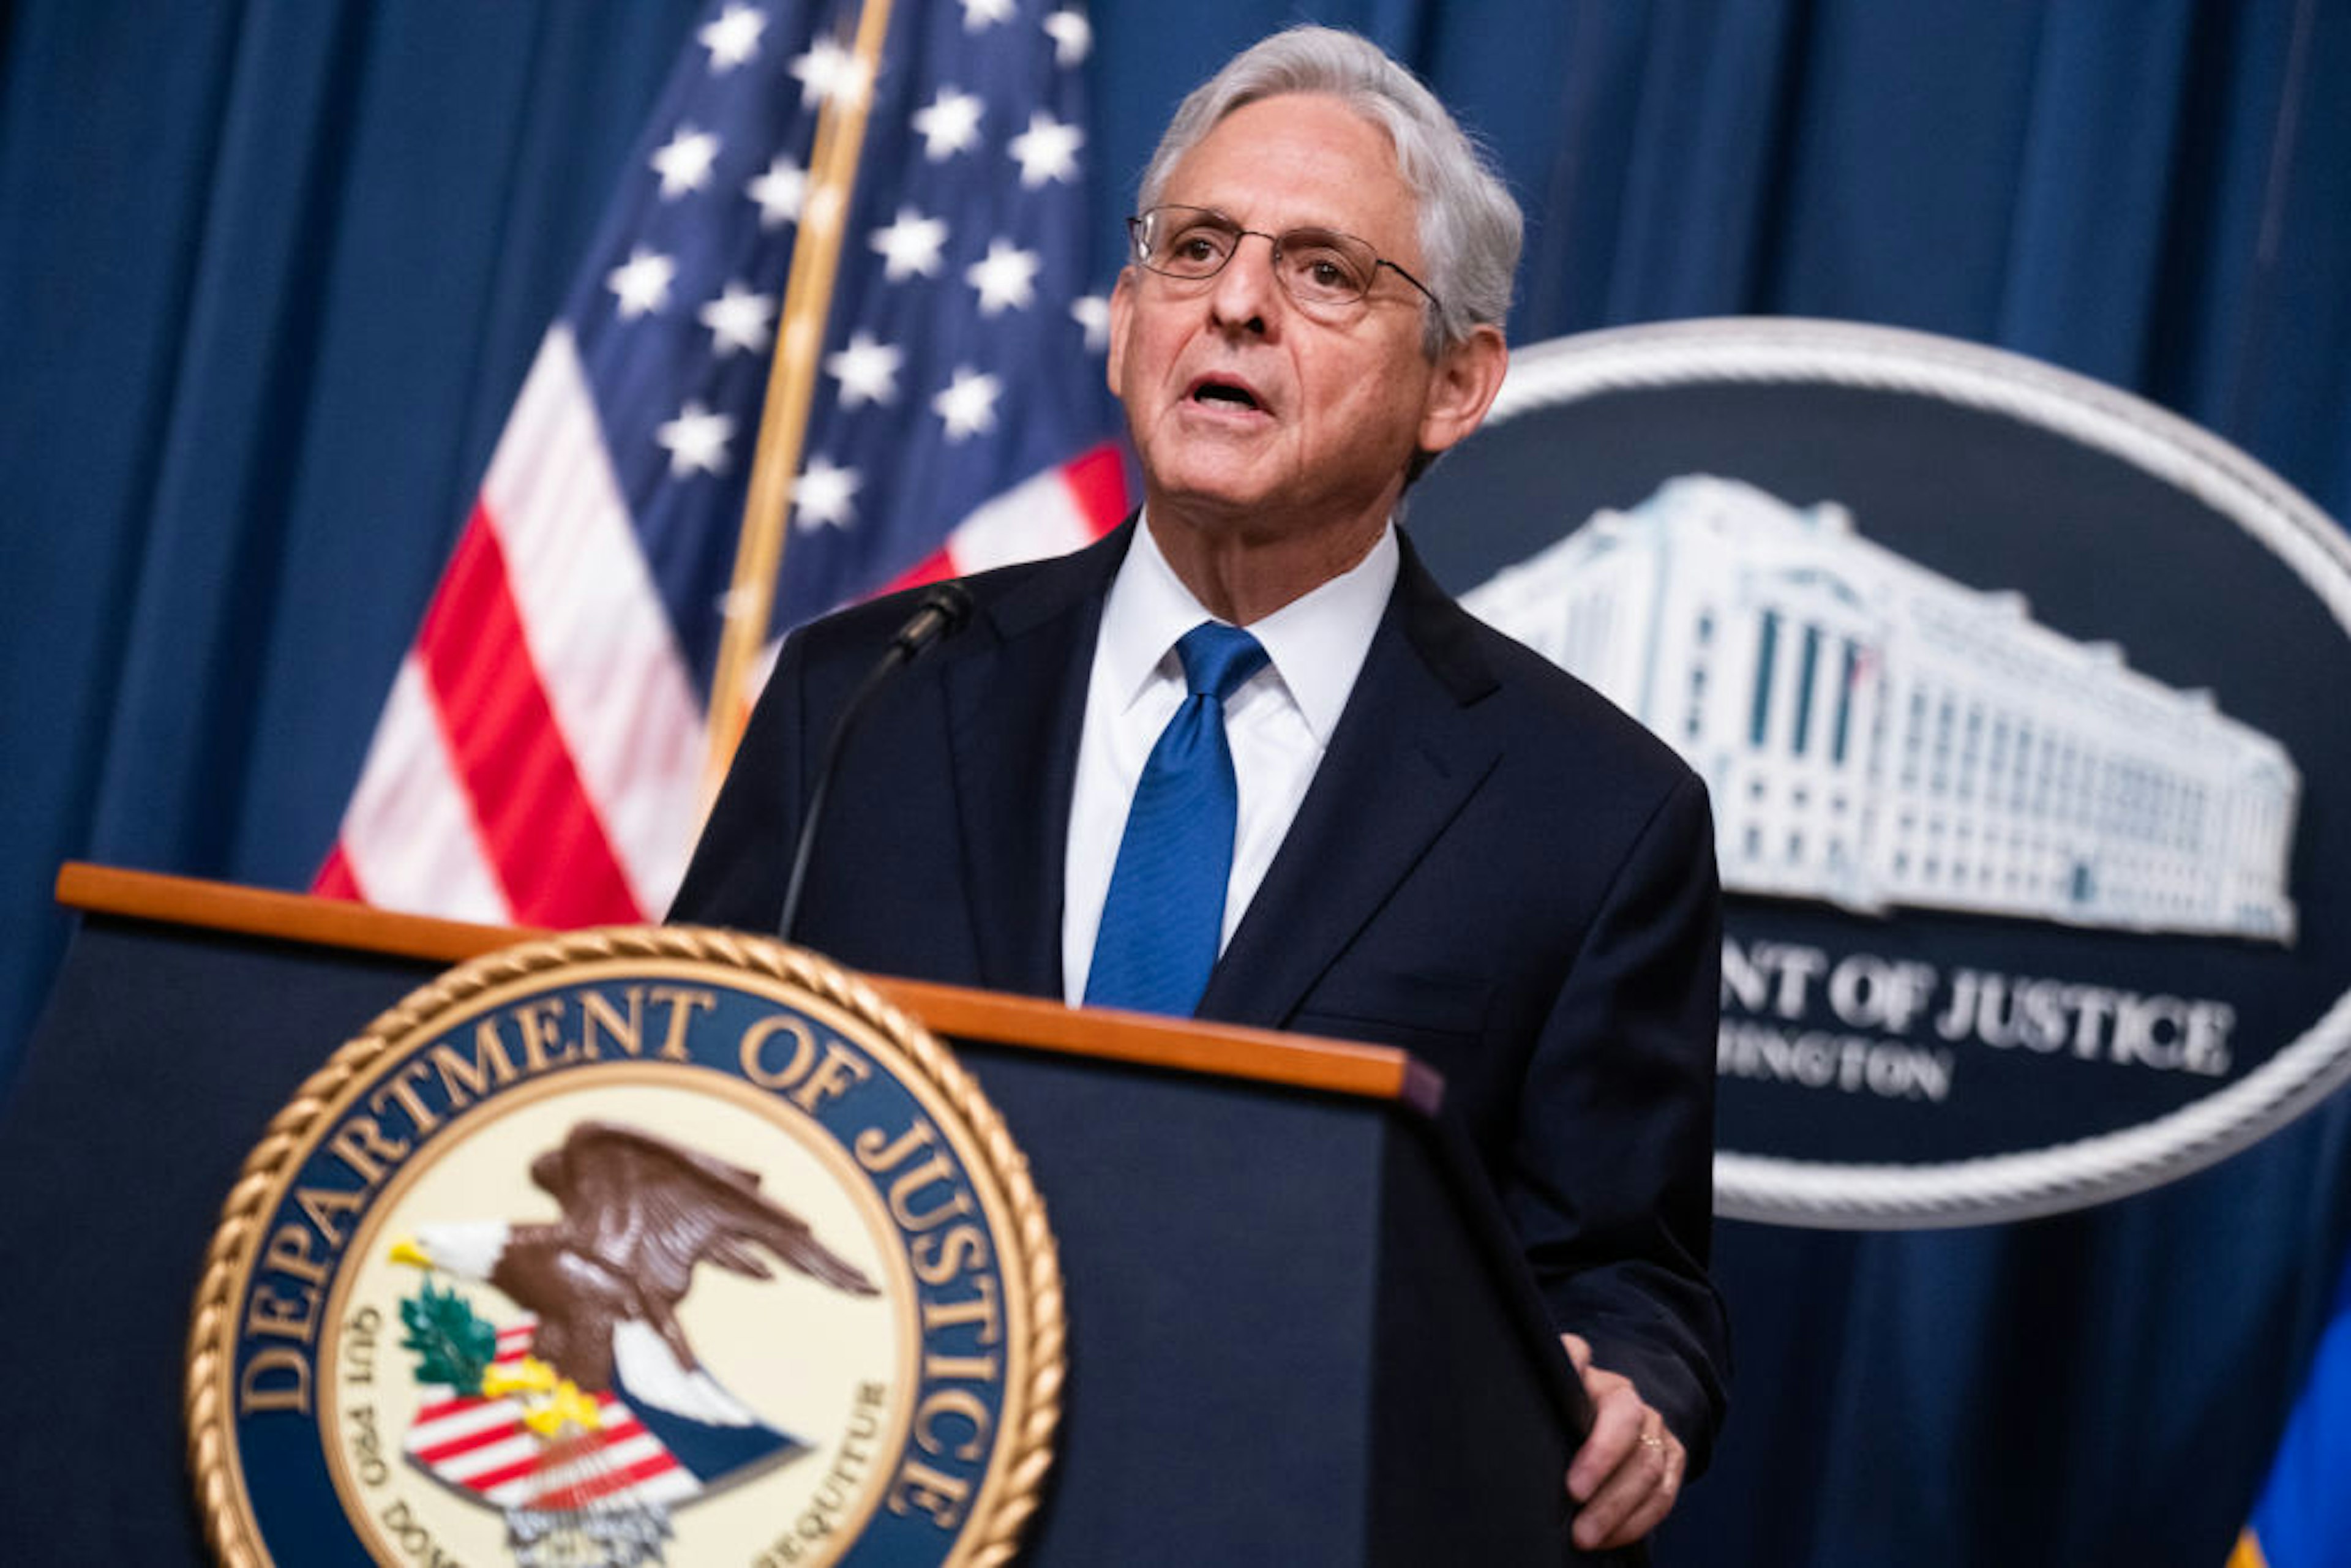 UNITED STATES - AUGUST 11: Attorney General Merrick Garland conducts a news conference at the Department of Justice announcing that U.S. Attorney David Weiss will be appointed special counsel to investigate Hunter Biden, the son of President Joe Biden, on Friday, August 11, 2023. (Tom Williams/CQ-Roll Call, Inc via Getty Images)